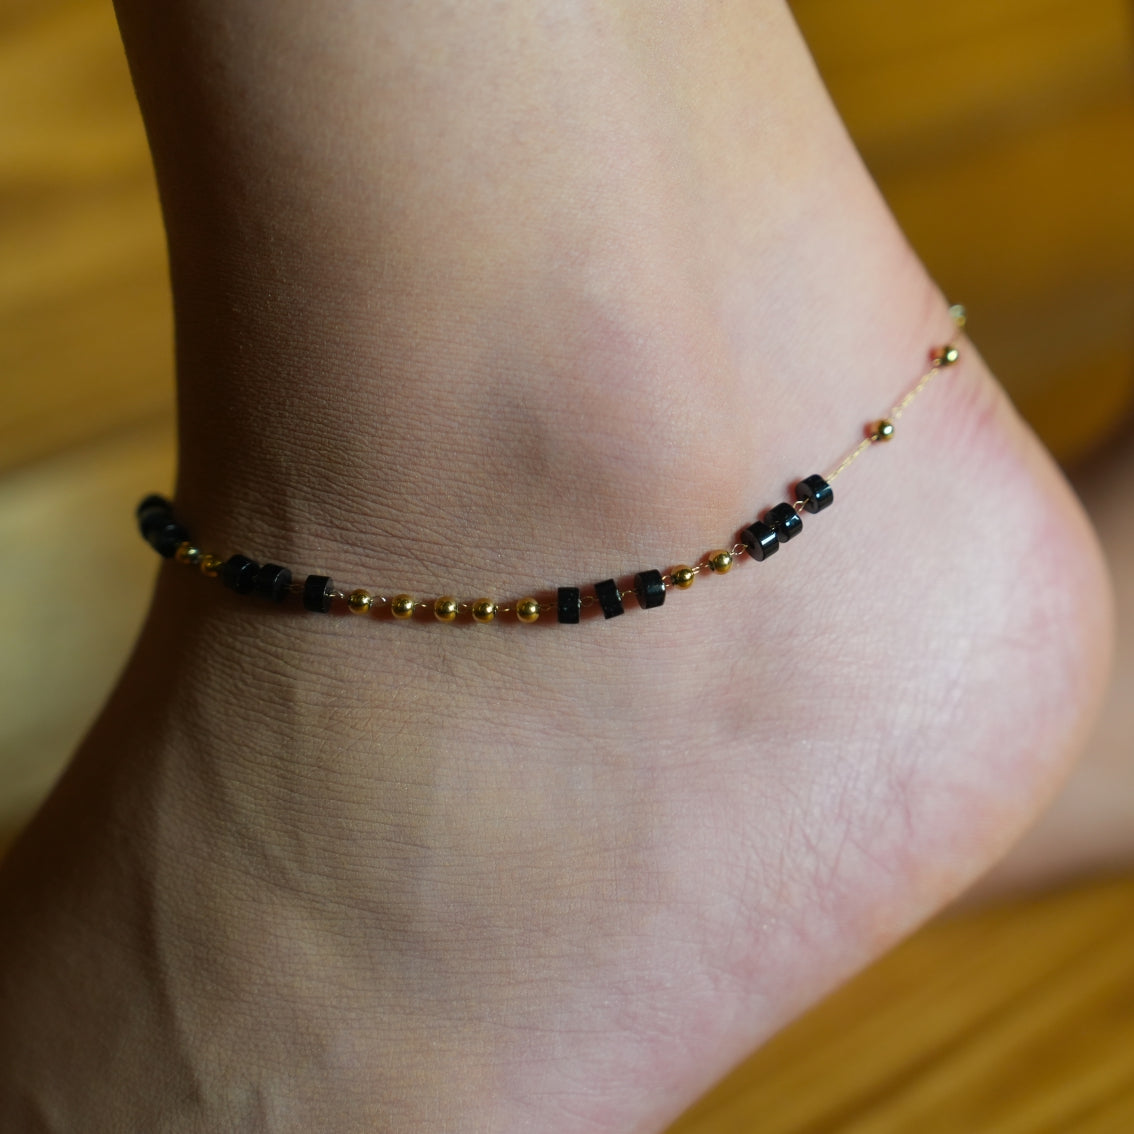 Style ROSARIO LG 1222: Black Onyx and Gold Beaded Chain Bracelet.